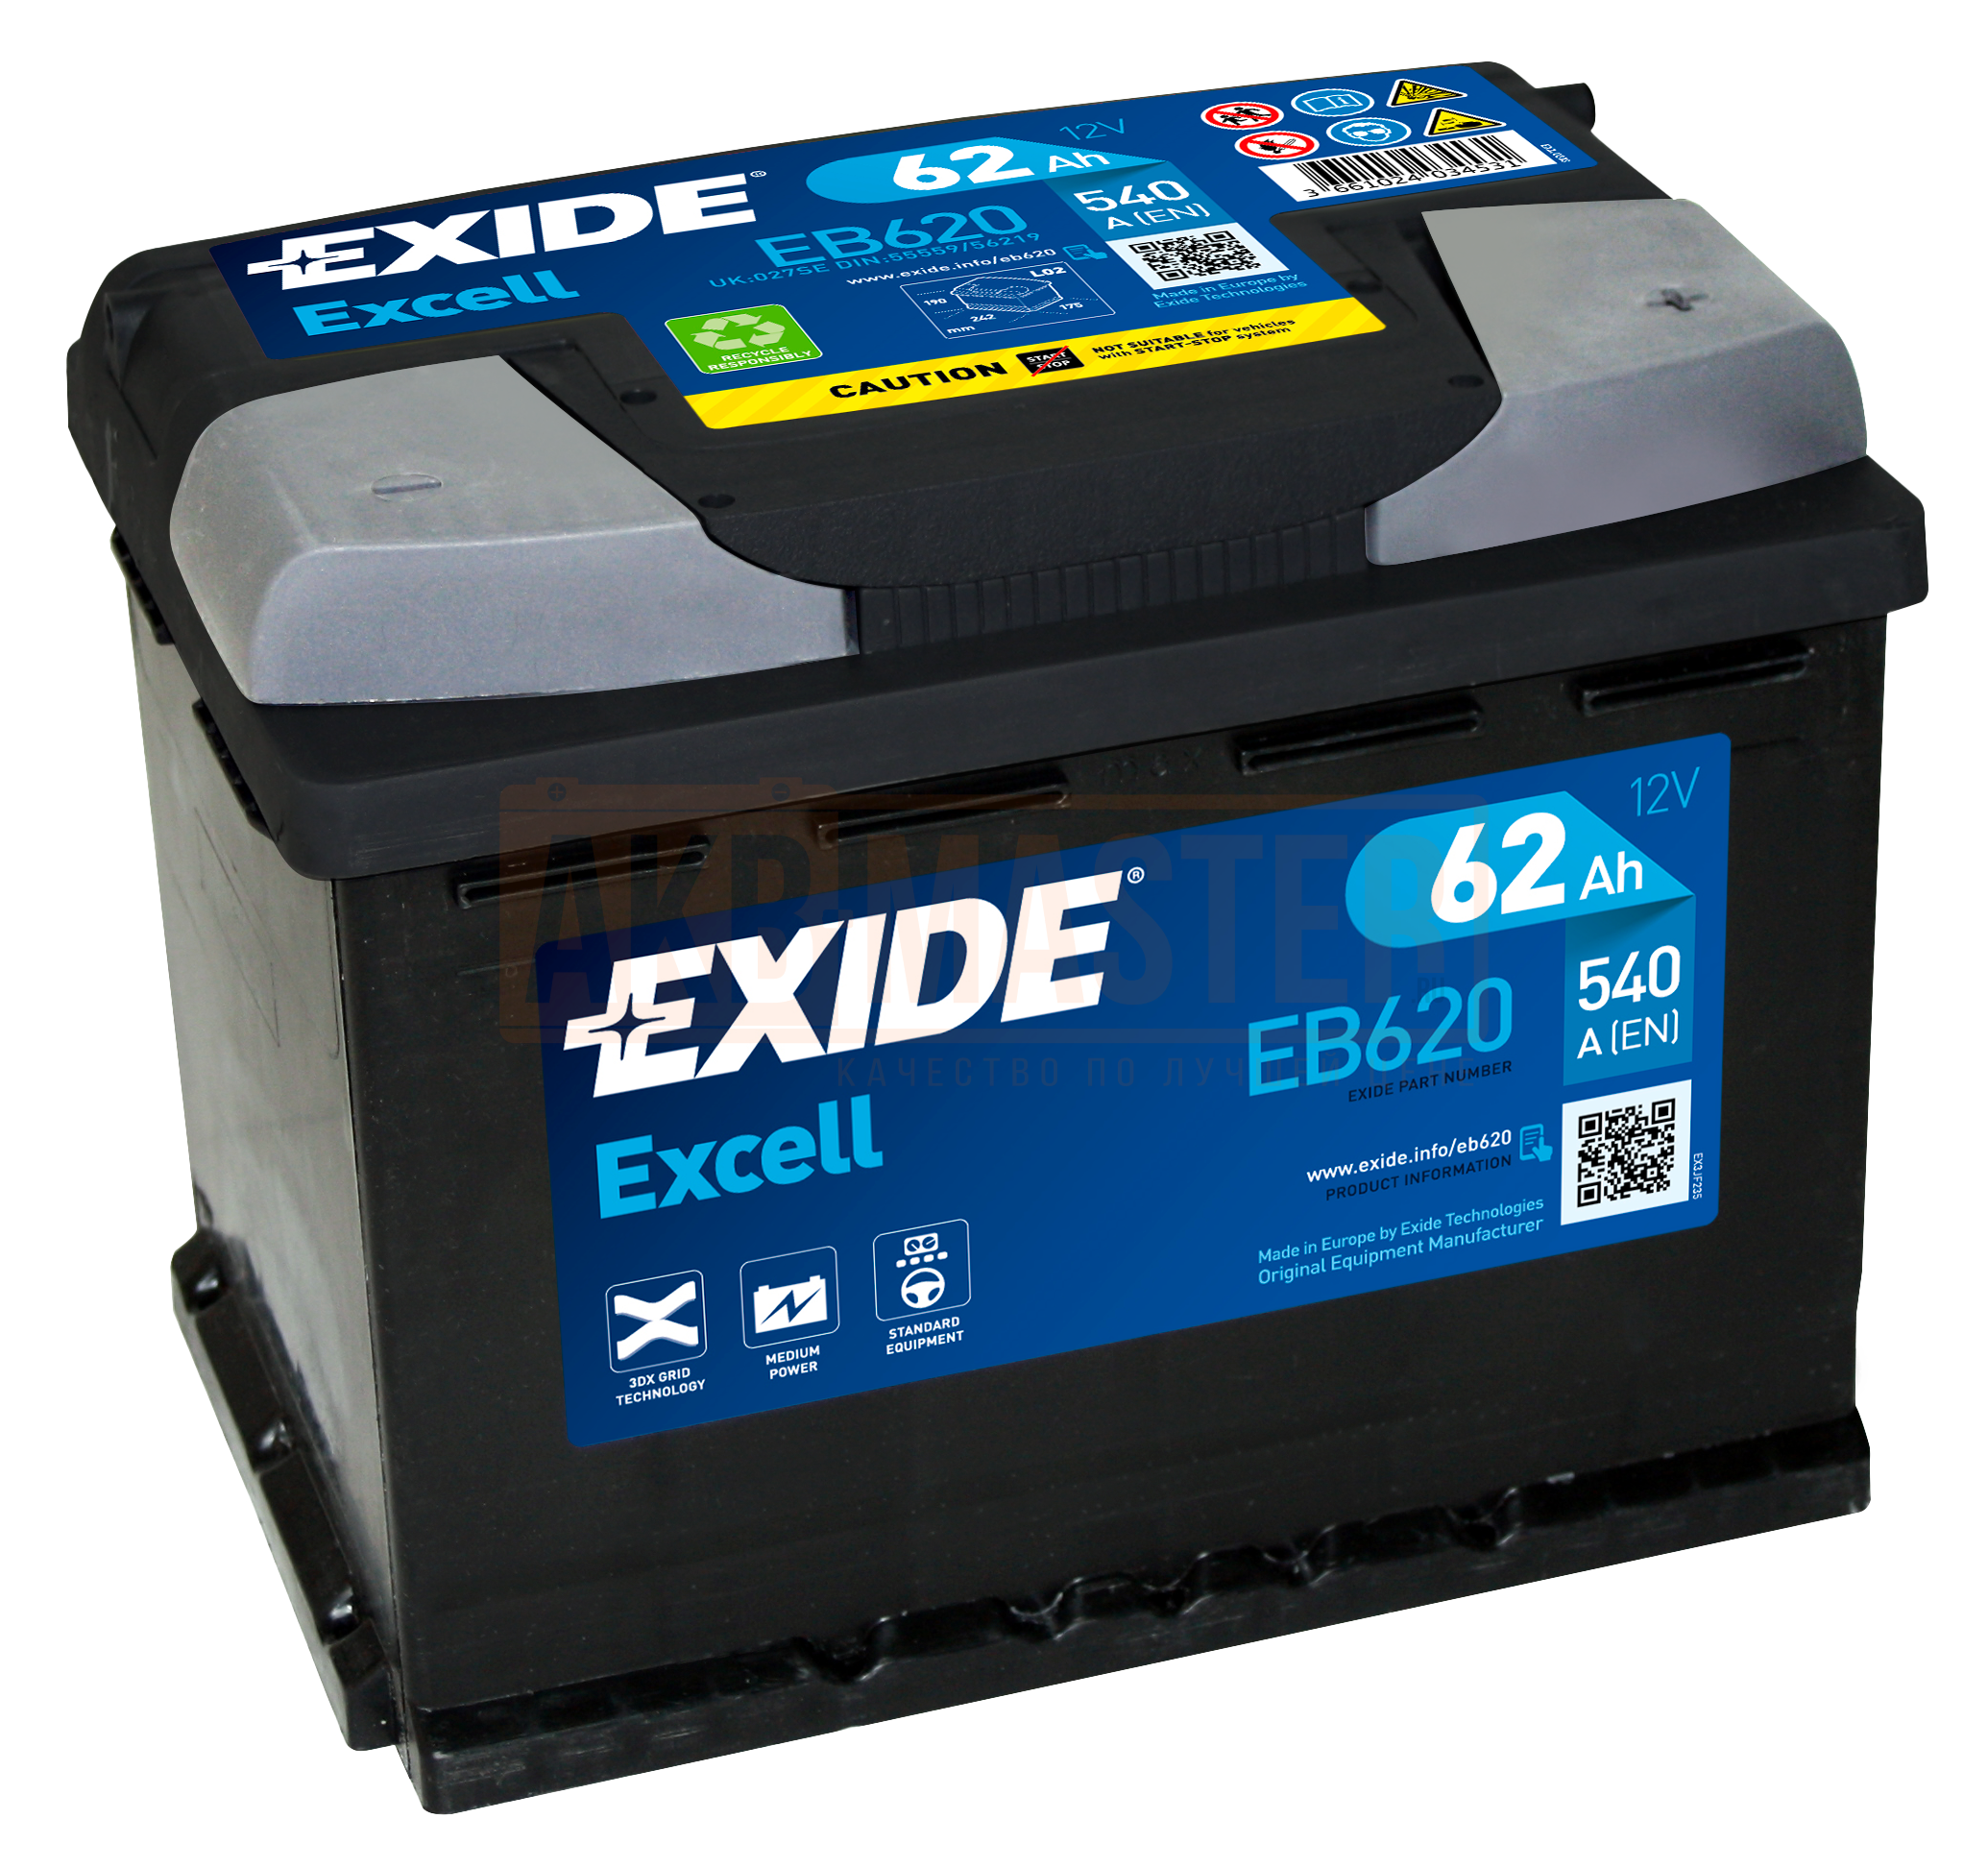 12v 60ah 540a. Аккумулятор Exide Excell eb602. Аккумулятор Exide eb620. Аккумулятор Exide Excell eb621. Аккумулятор Exide Excell eb620.